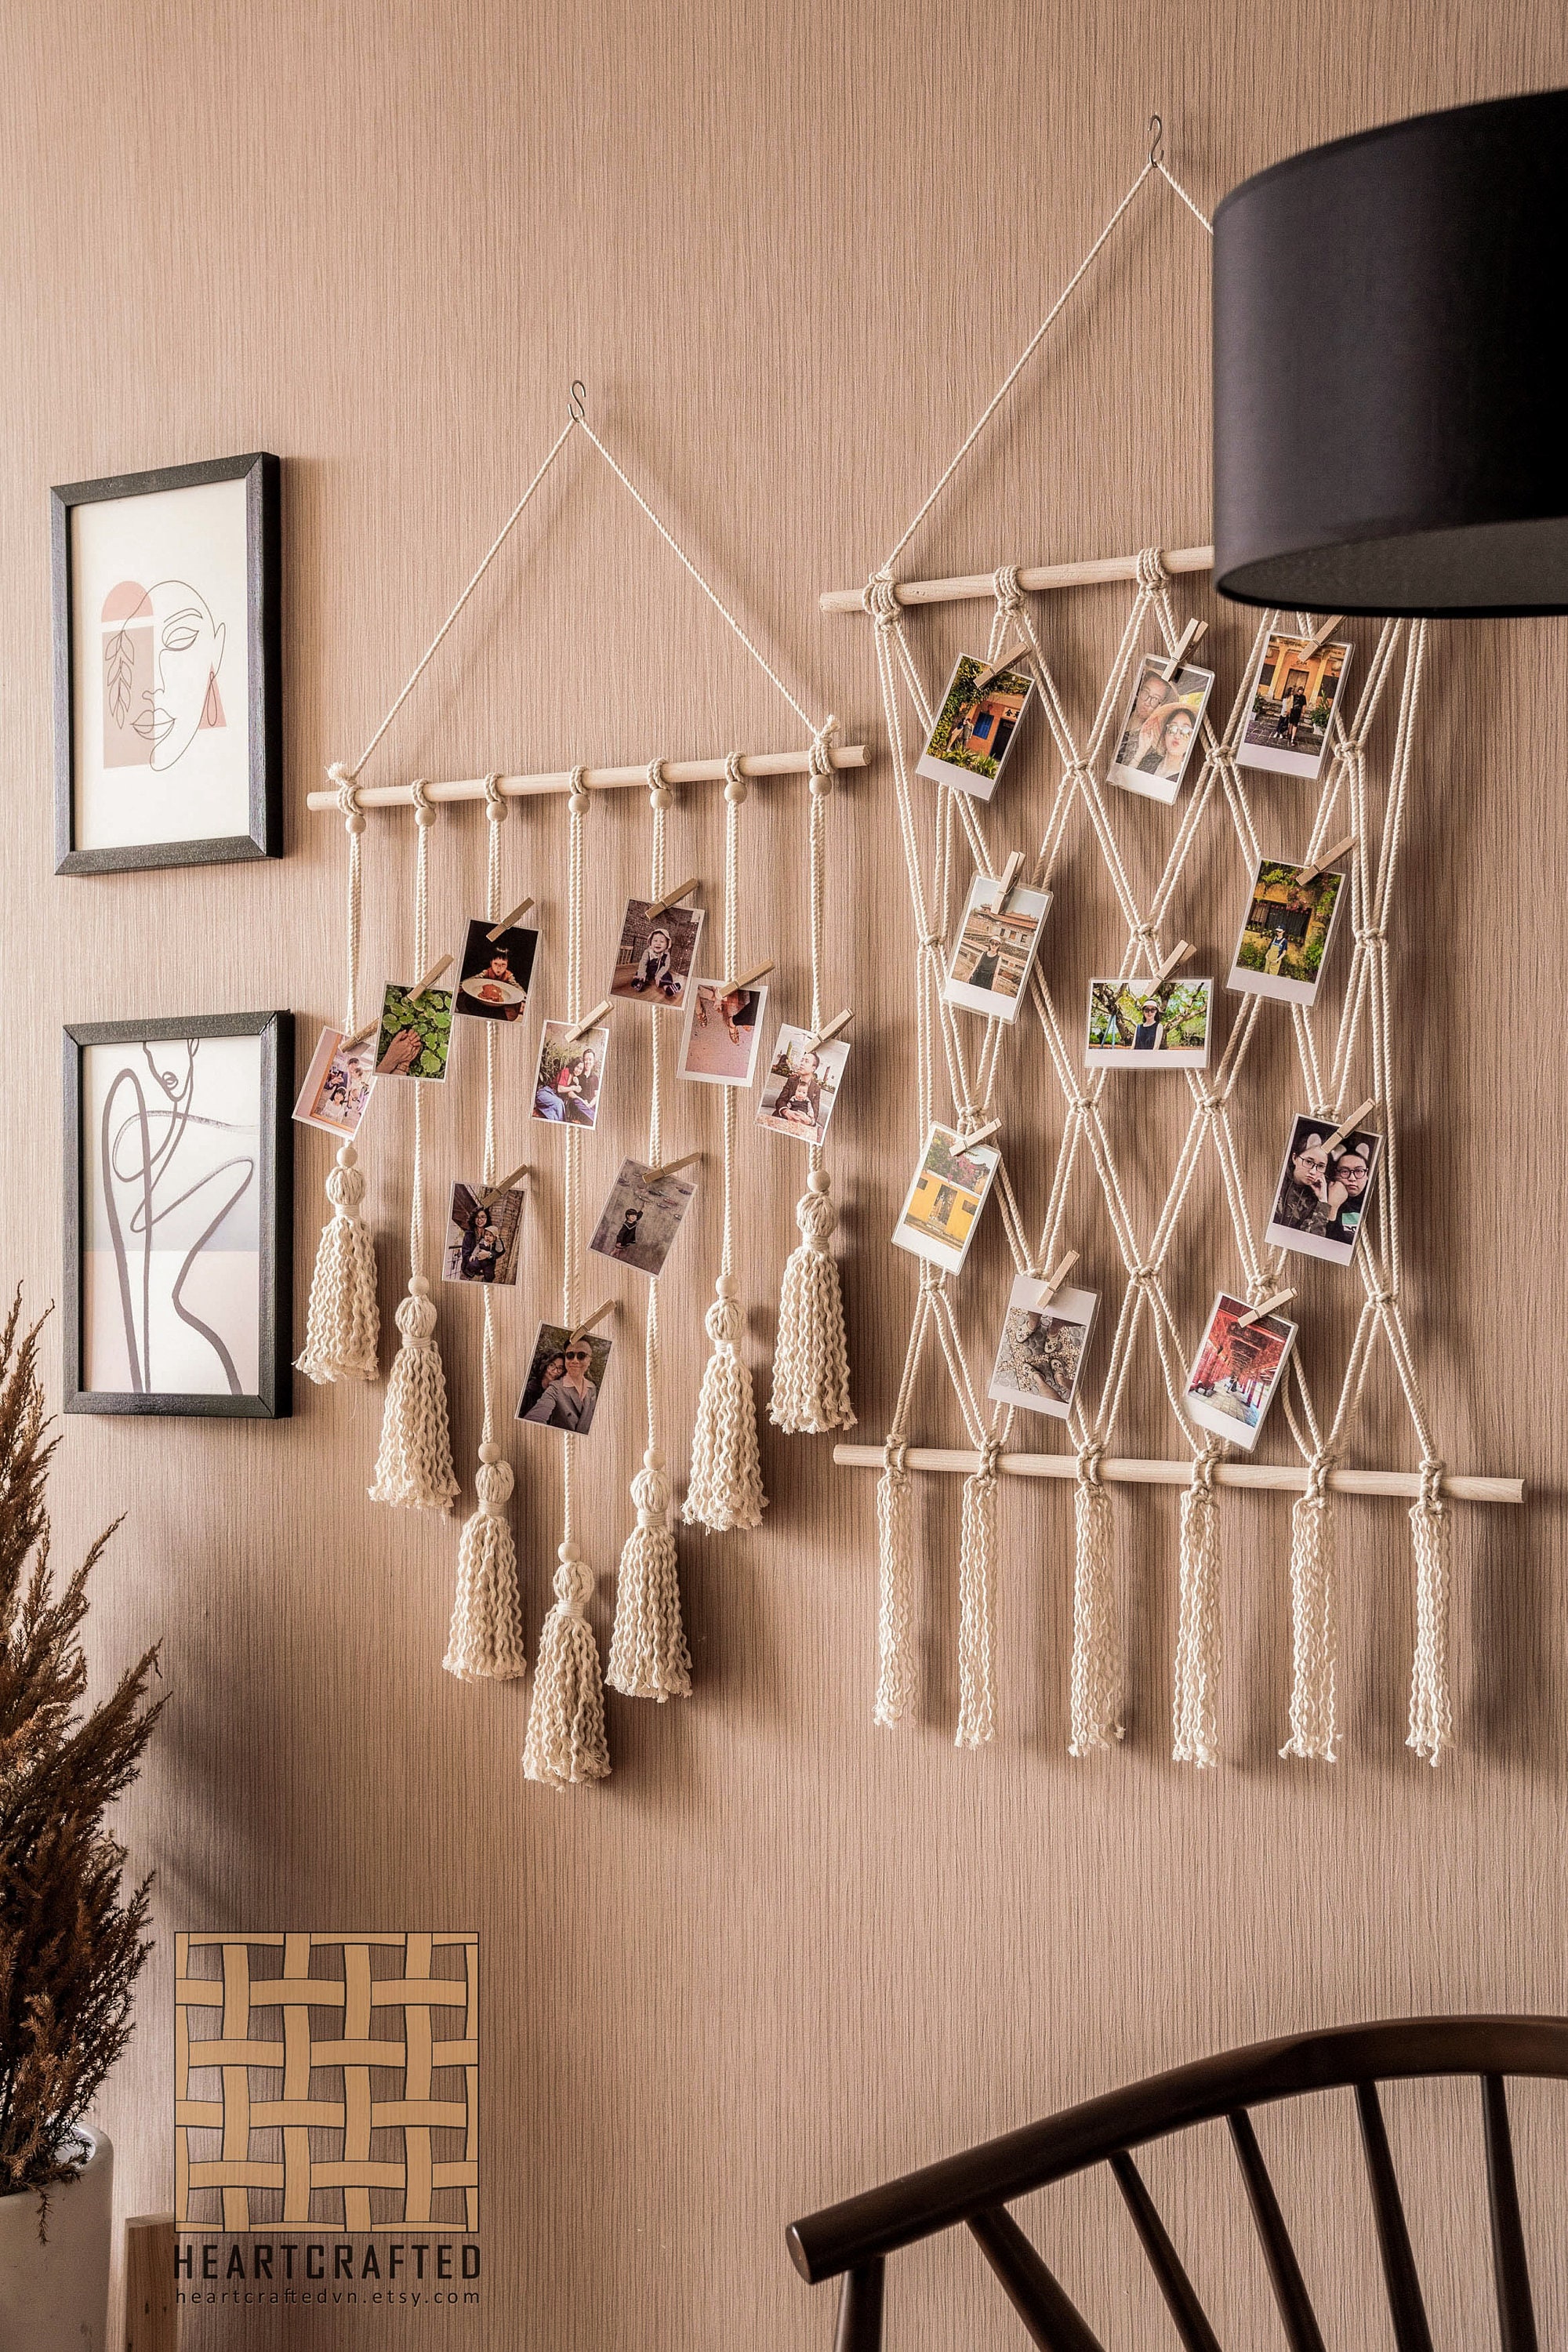 Photo Frames Collage Macrame Wall Hanging Pictures Display